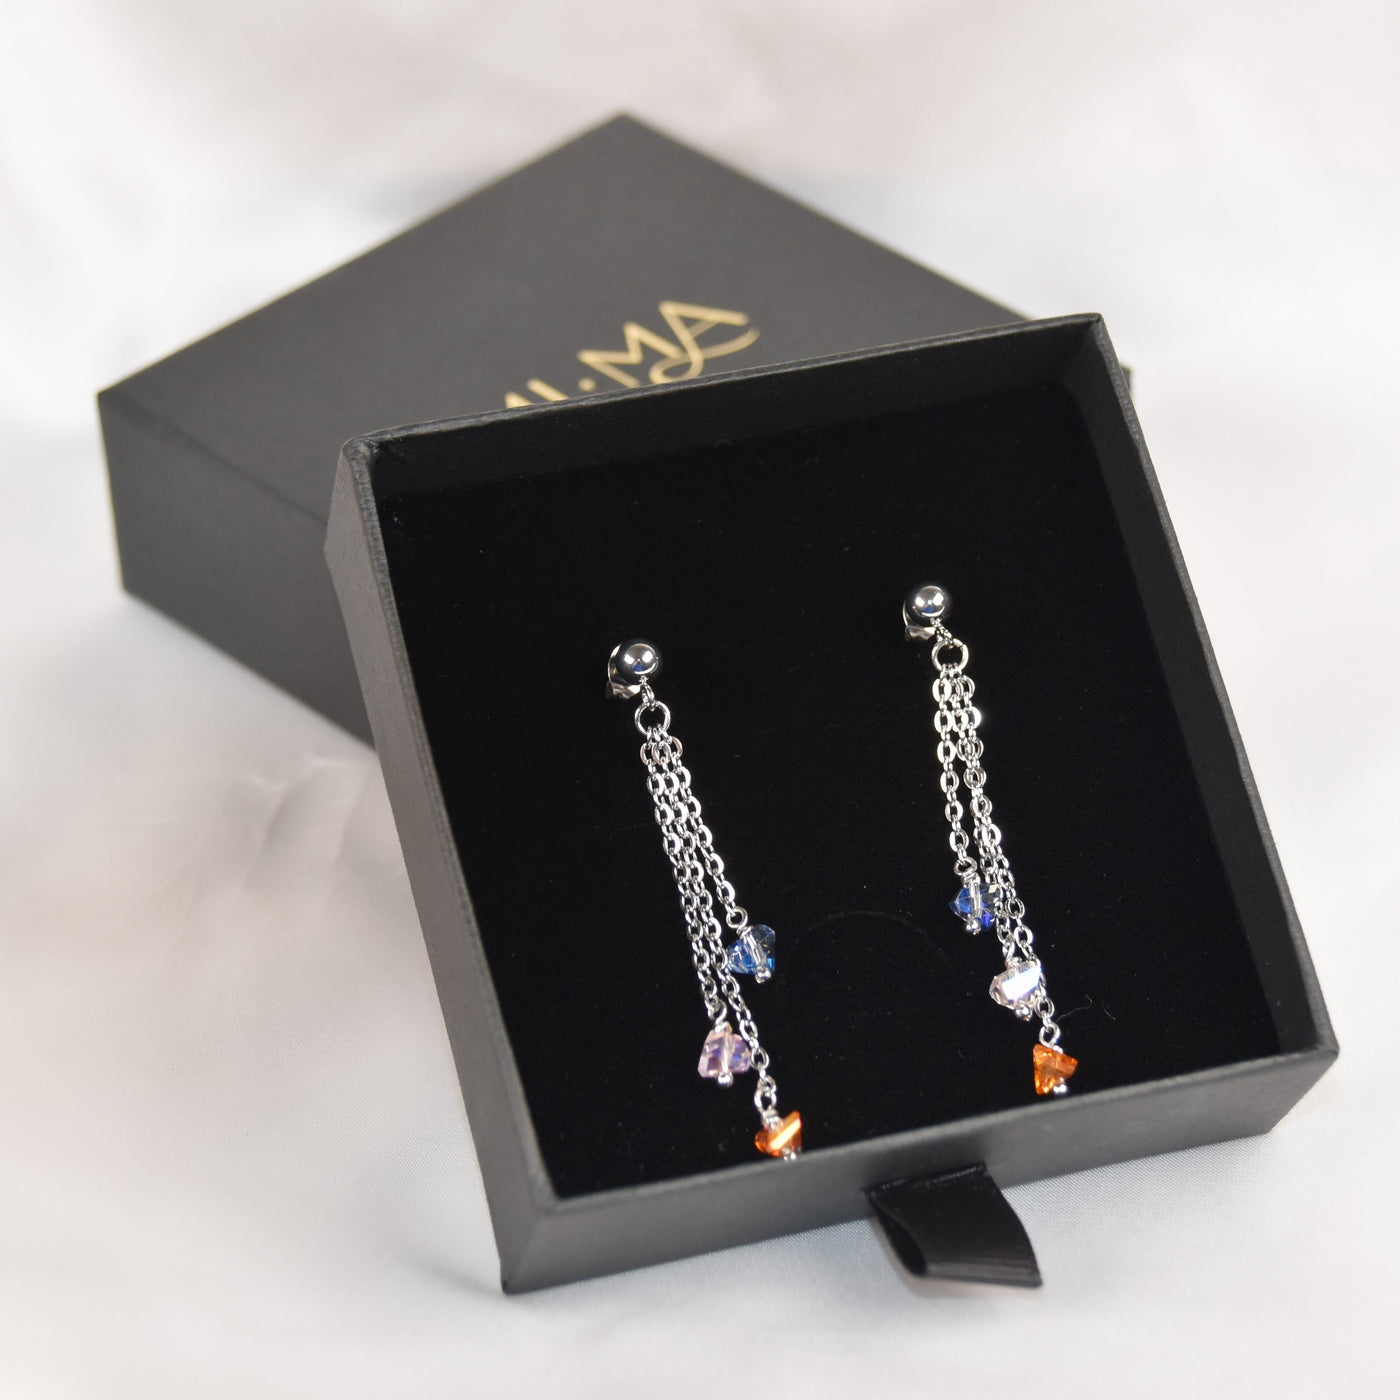 Earrings with colorful crystals